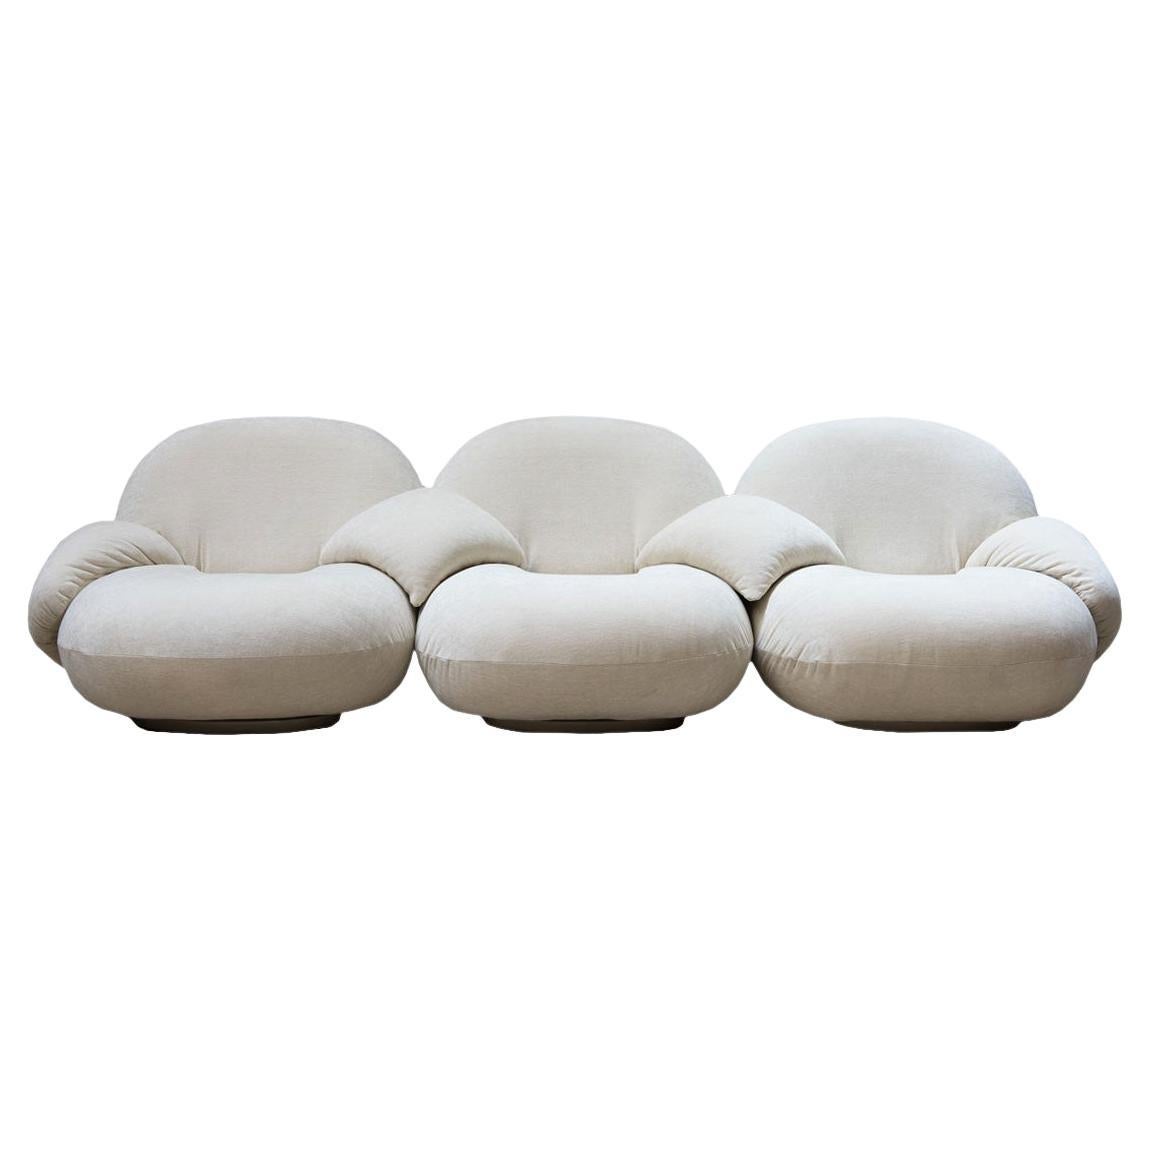 Price listed for the starting fabric category A.
Legendary French designer Pierre Paulin originally designed the Pacha Lounge Chair in 1975. Paulin designed the chair in harmony with the changing design style of its period, replacing the austerity